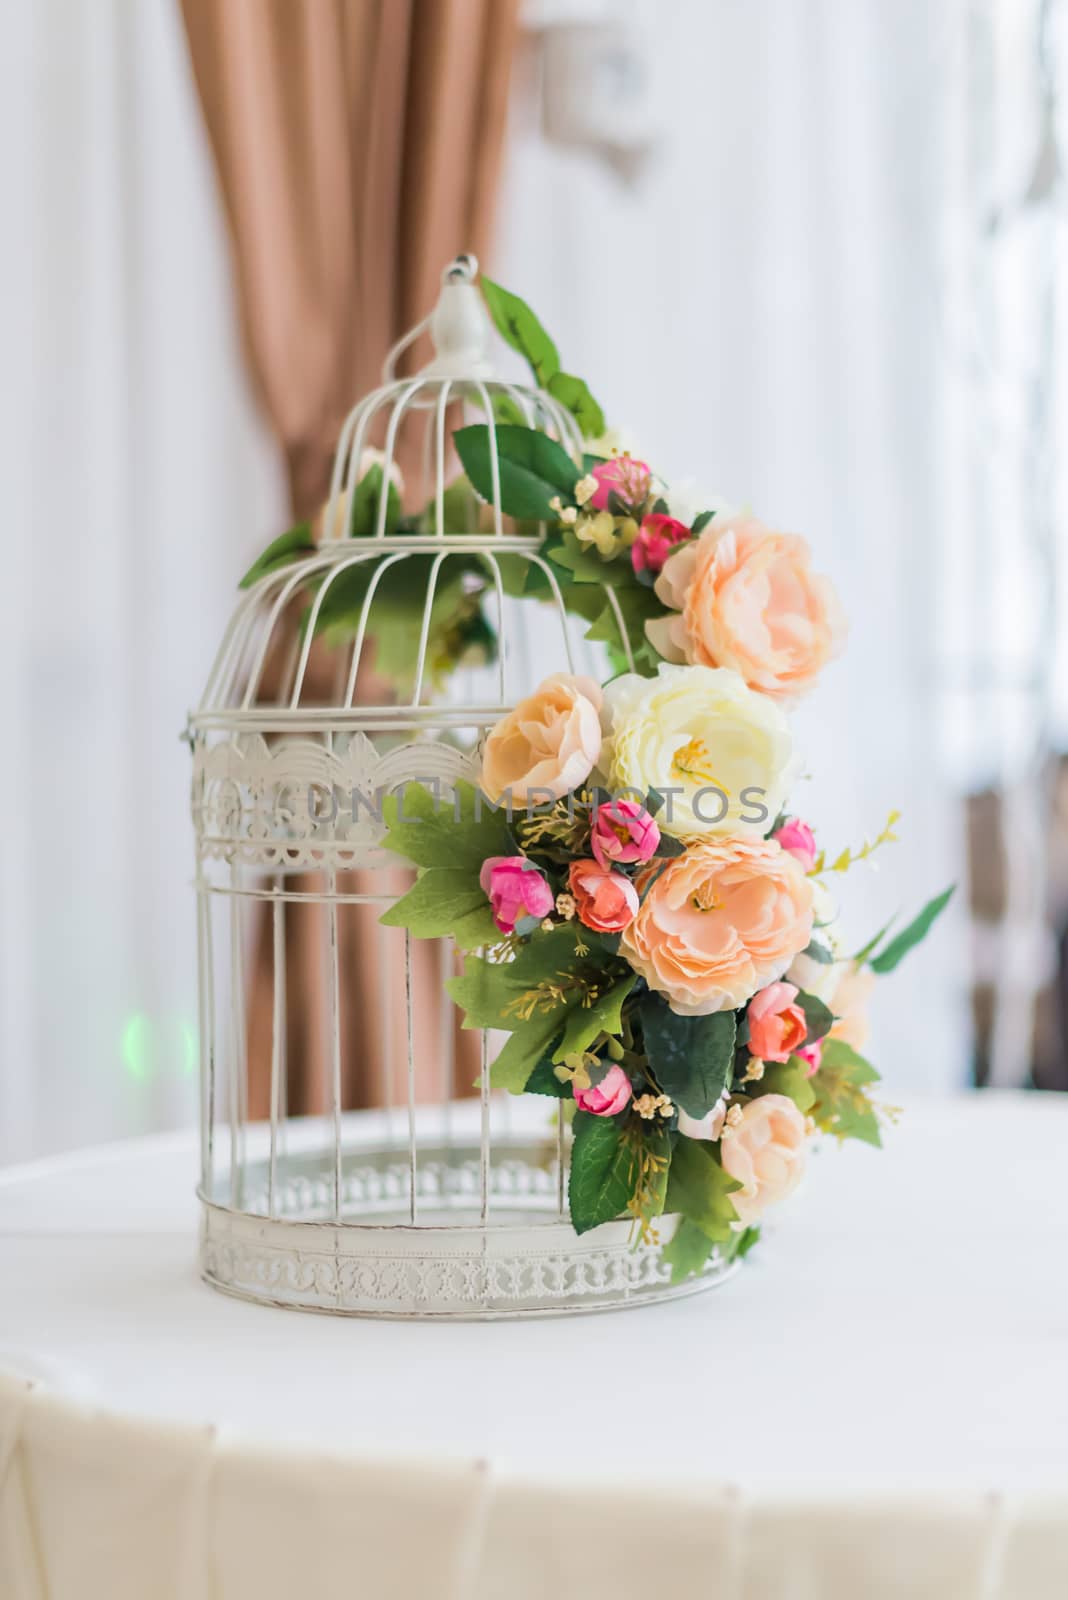 White cage with flowers as decoration on wedding day